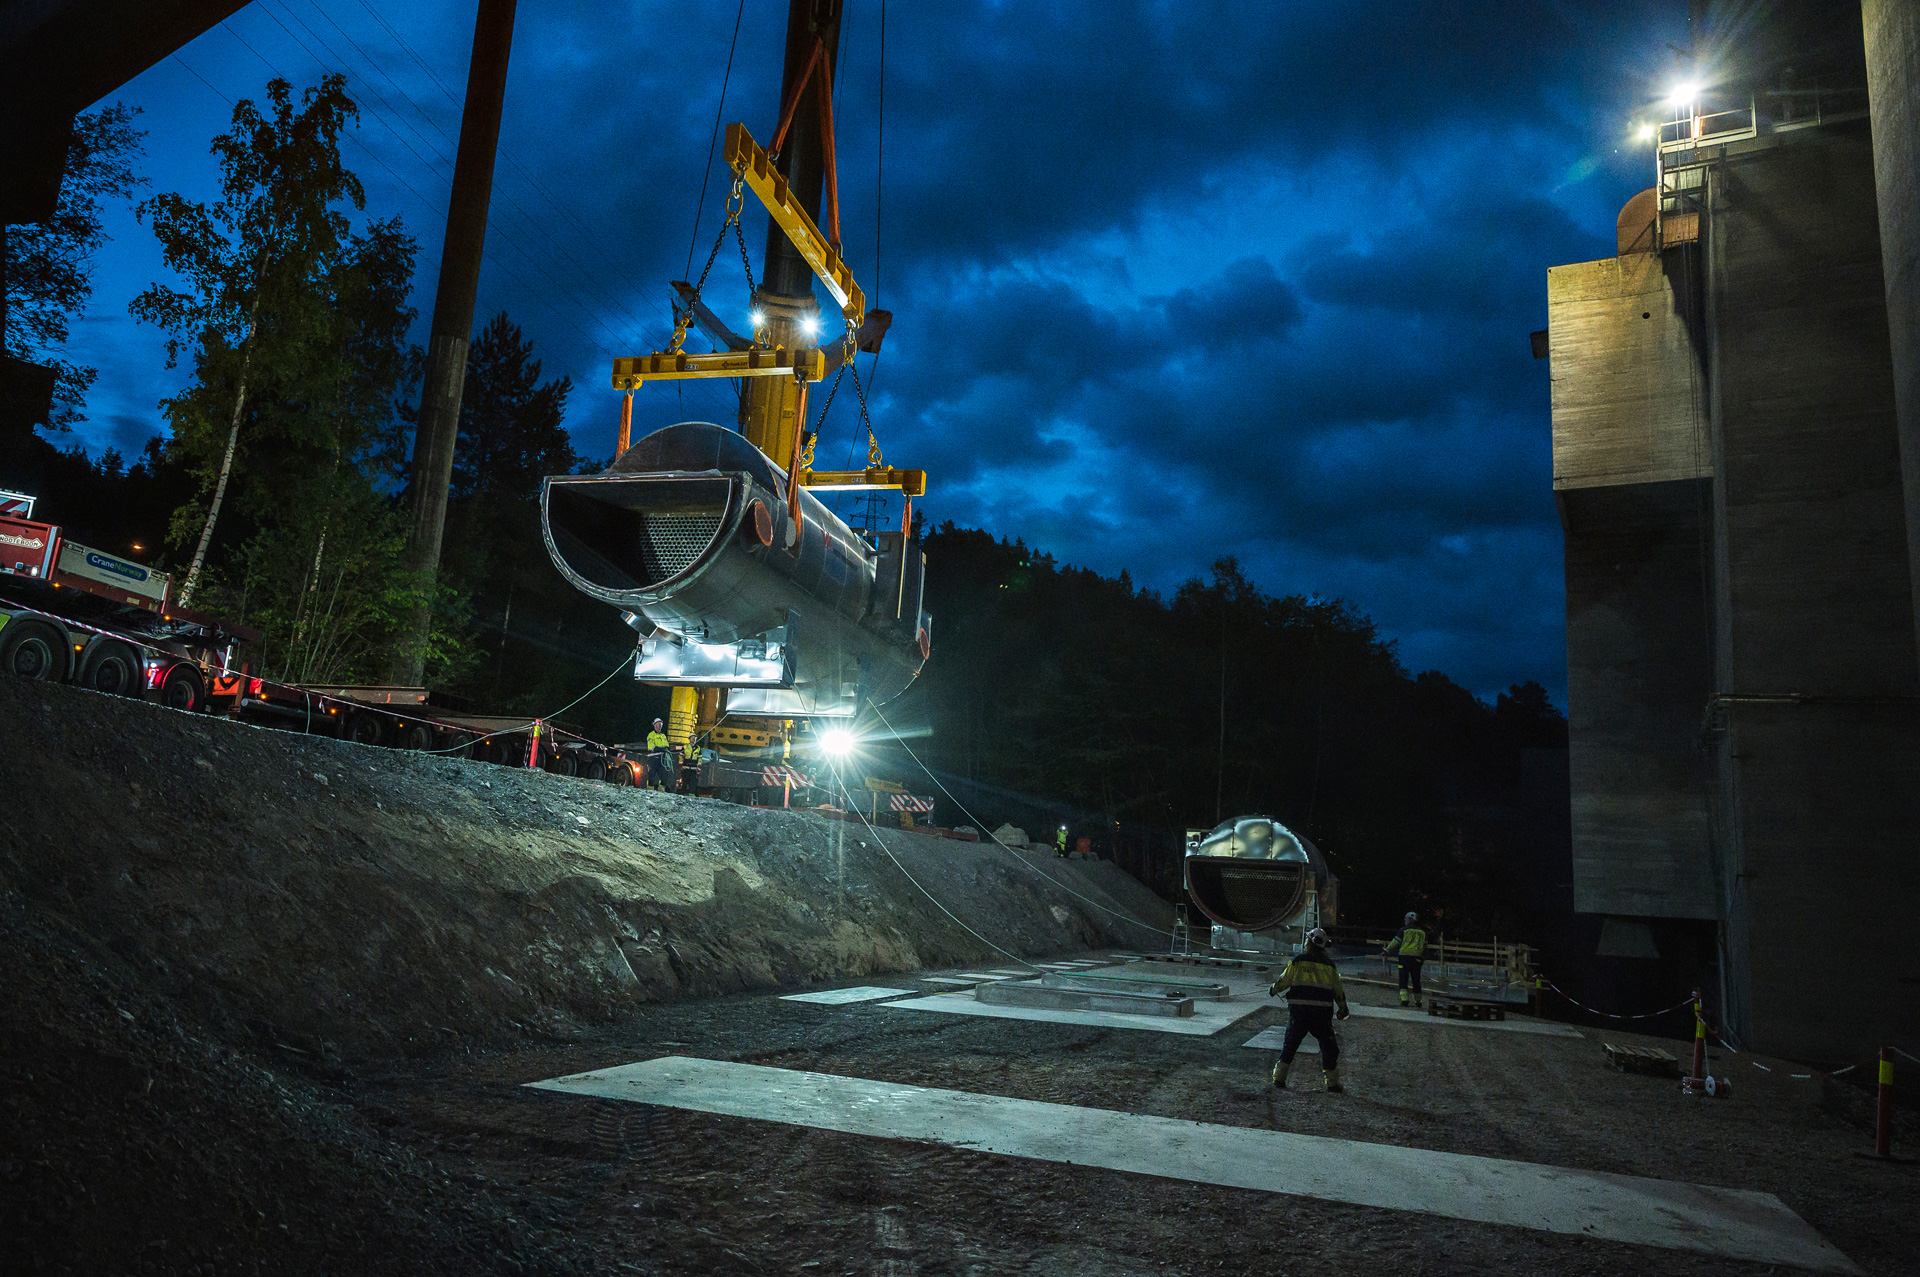 Construction site at twilight or night time with a large crane lifting a section of a CO₂ absorber. A similar sections is on the ground. Workers are present, and the scene is illuminated by artificial lighting.